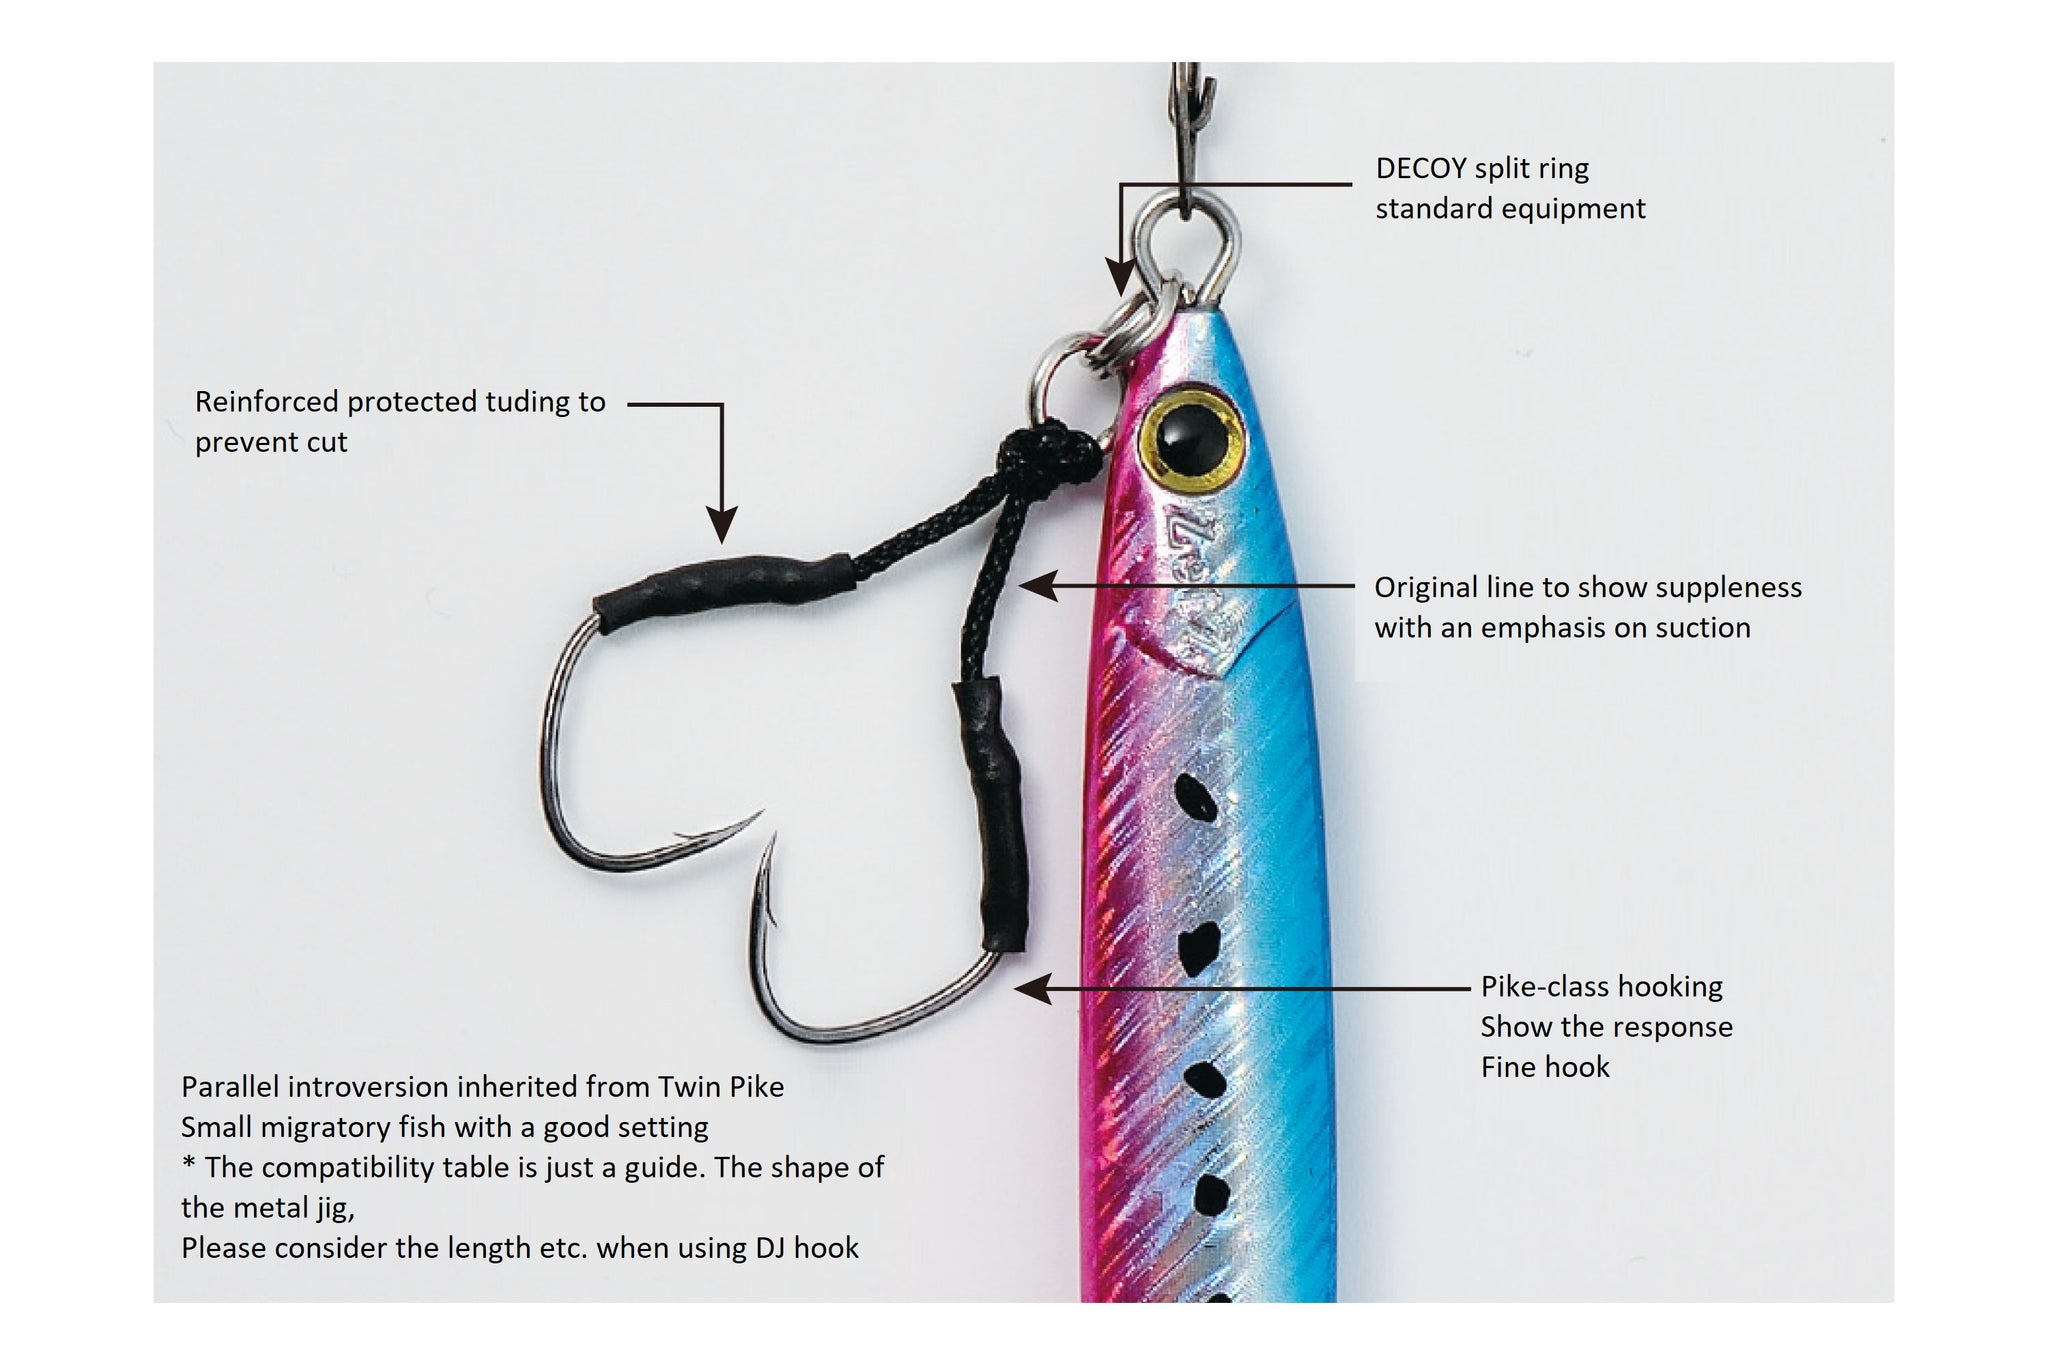 Kamikaze - 2 Game Lure Assist Hook 12-0 Rigs Twin Pack